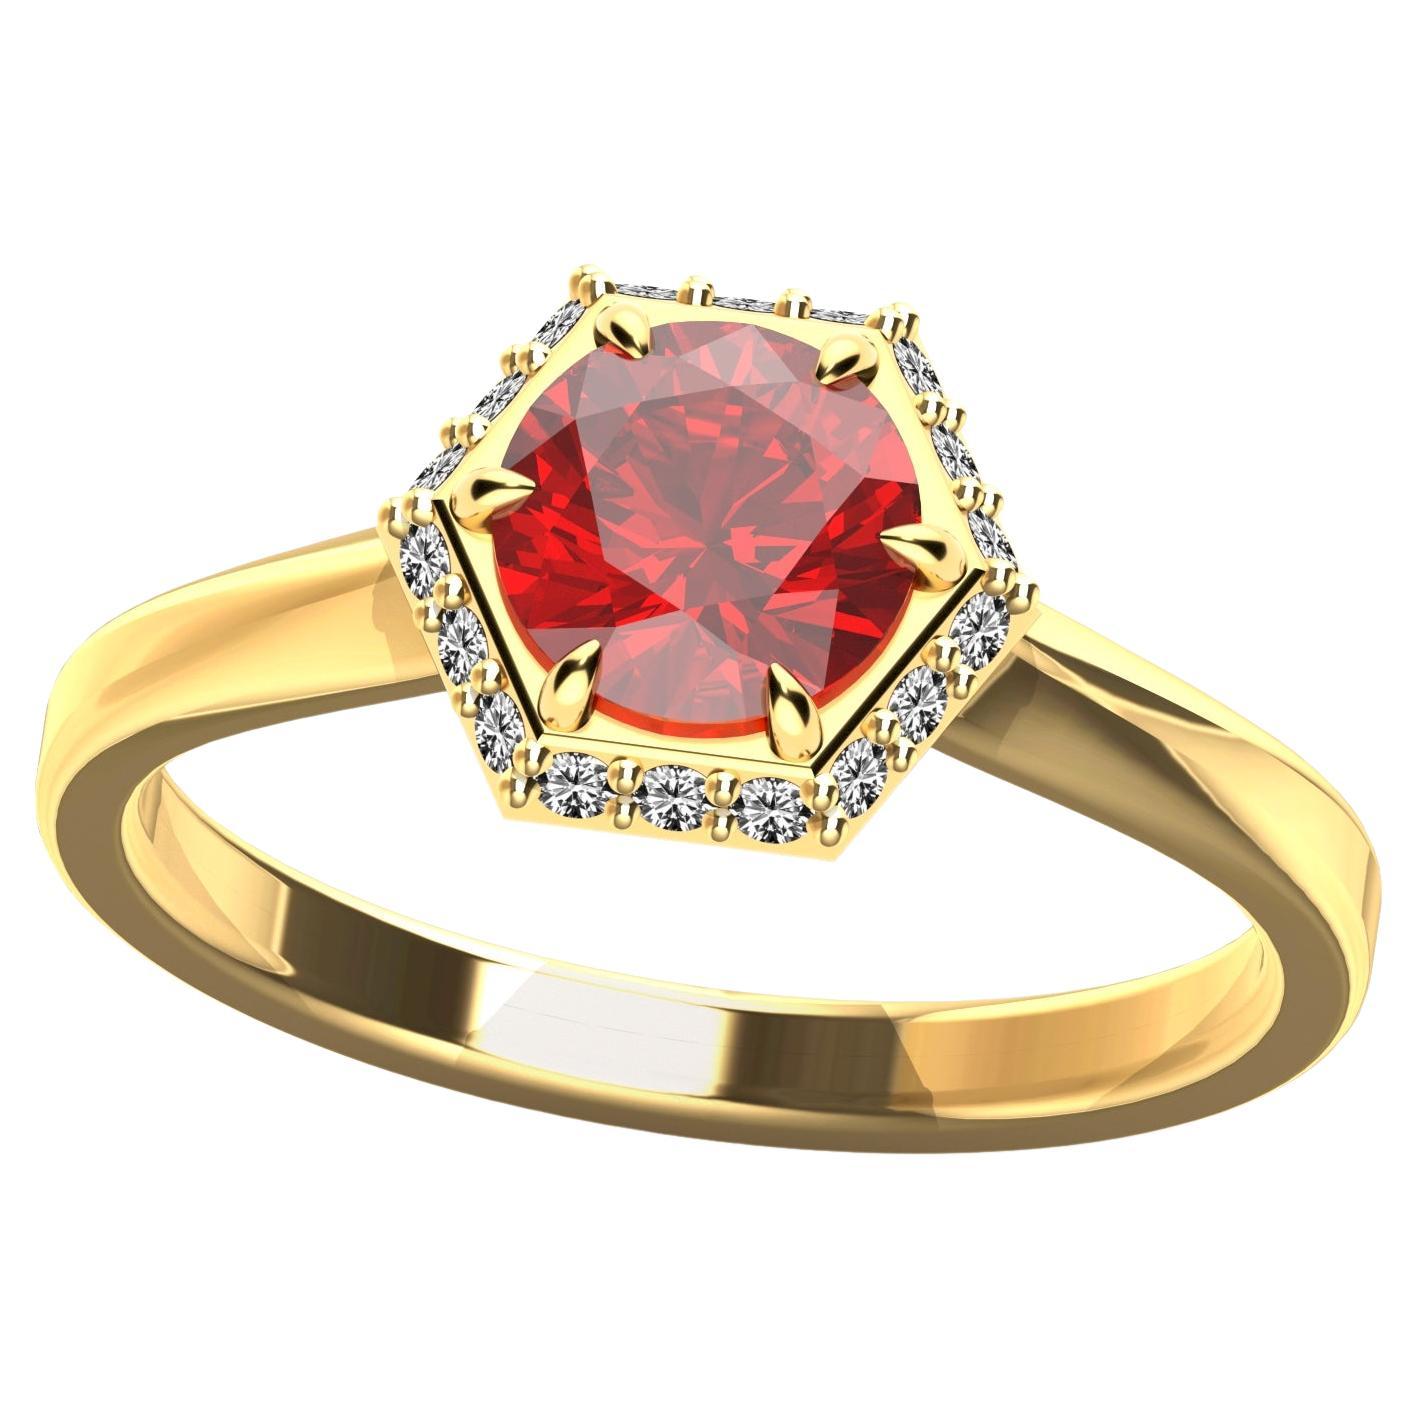 For Sale:  18 Karat Yellow Gold Art Deco Hexagon Inspired Ruby Engagement Ring